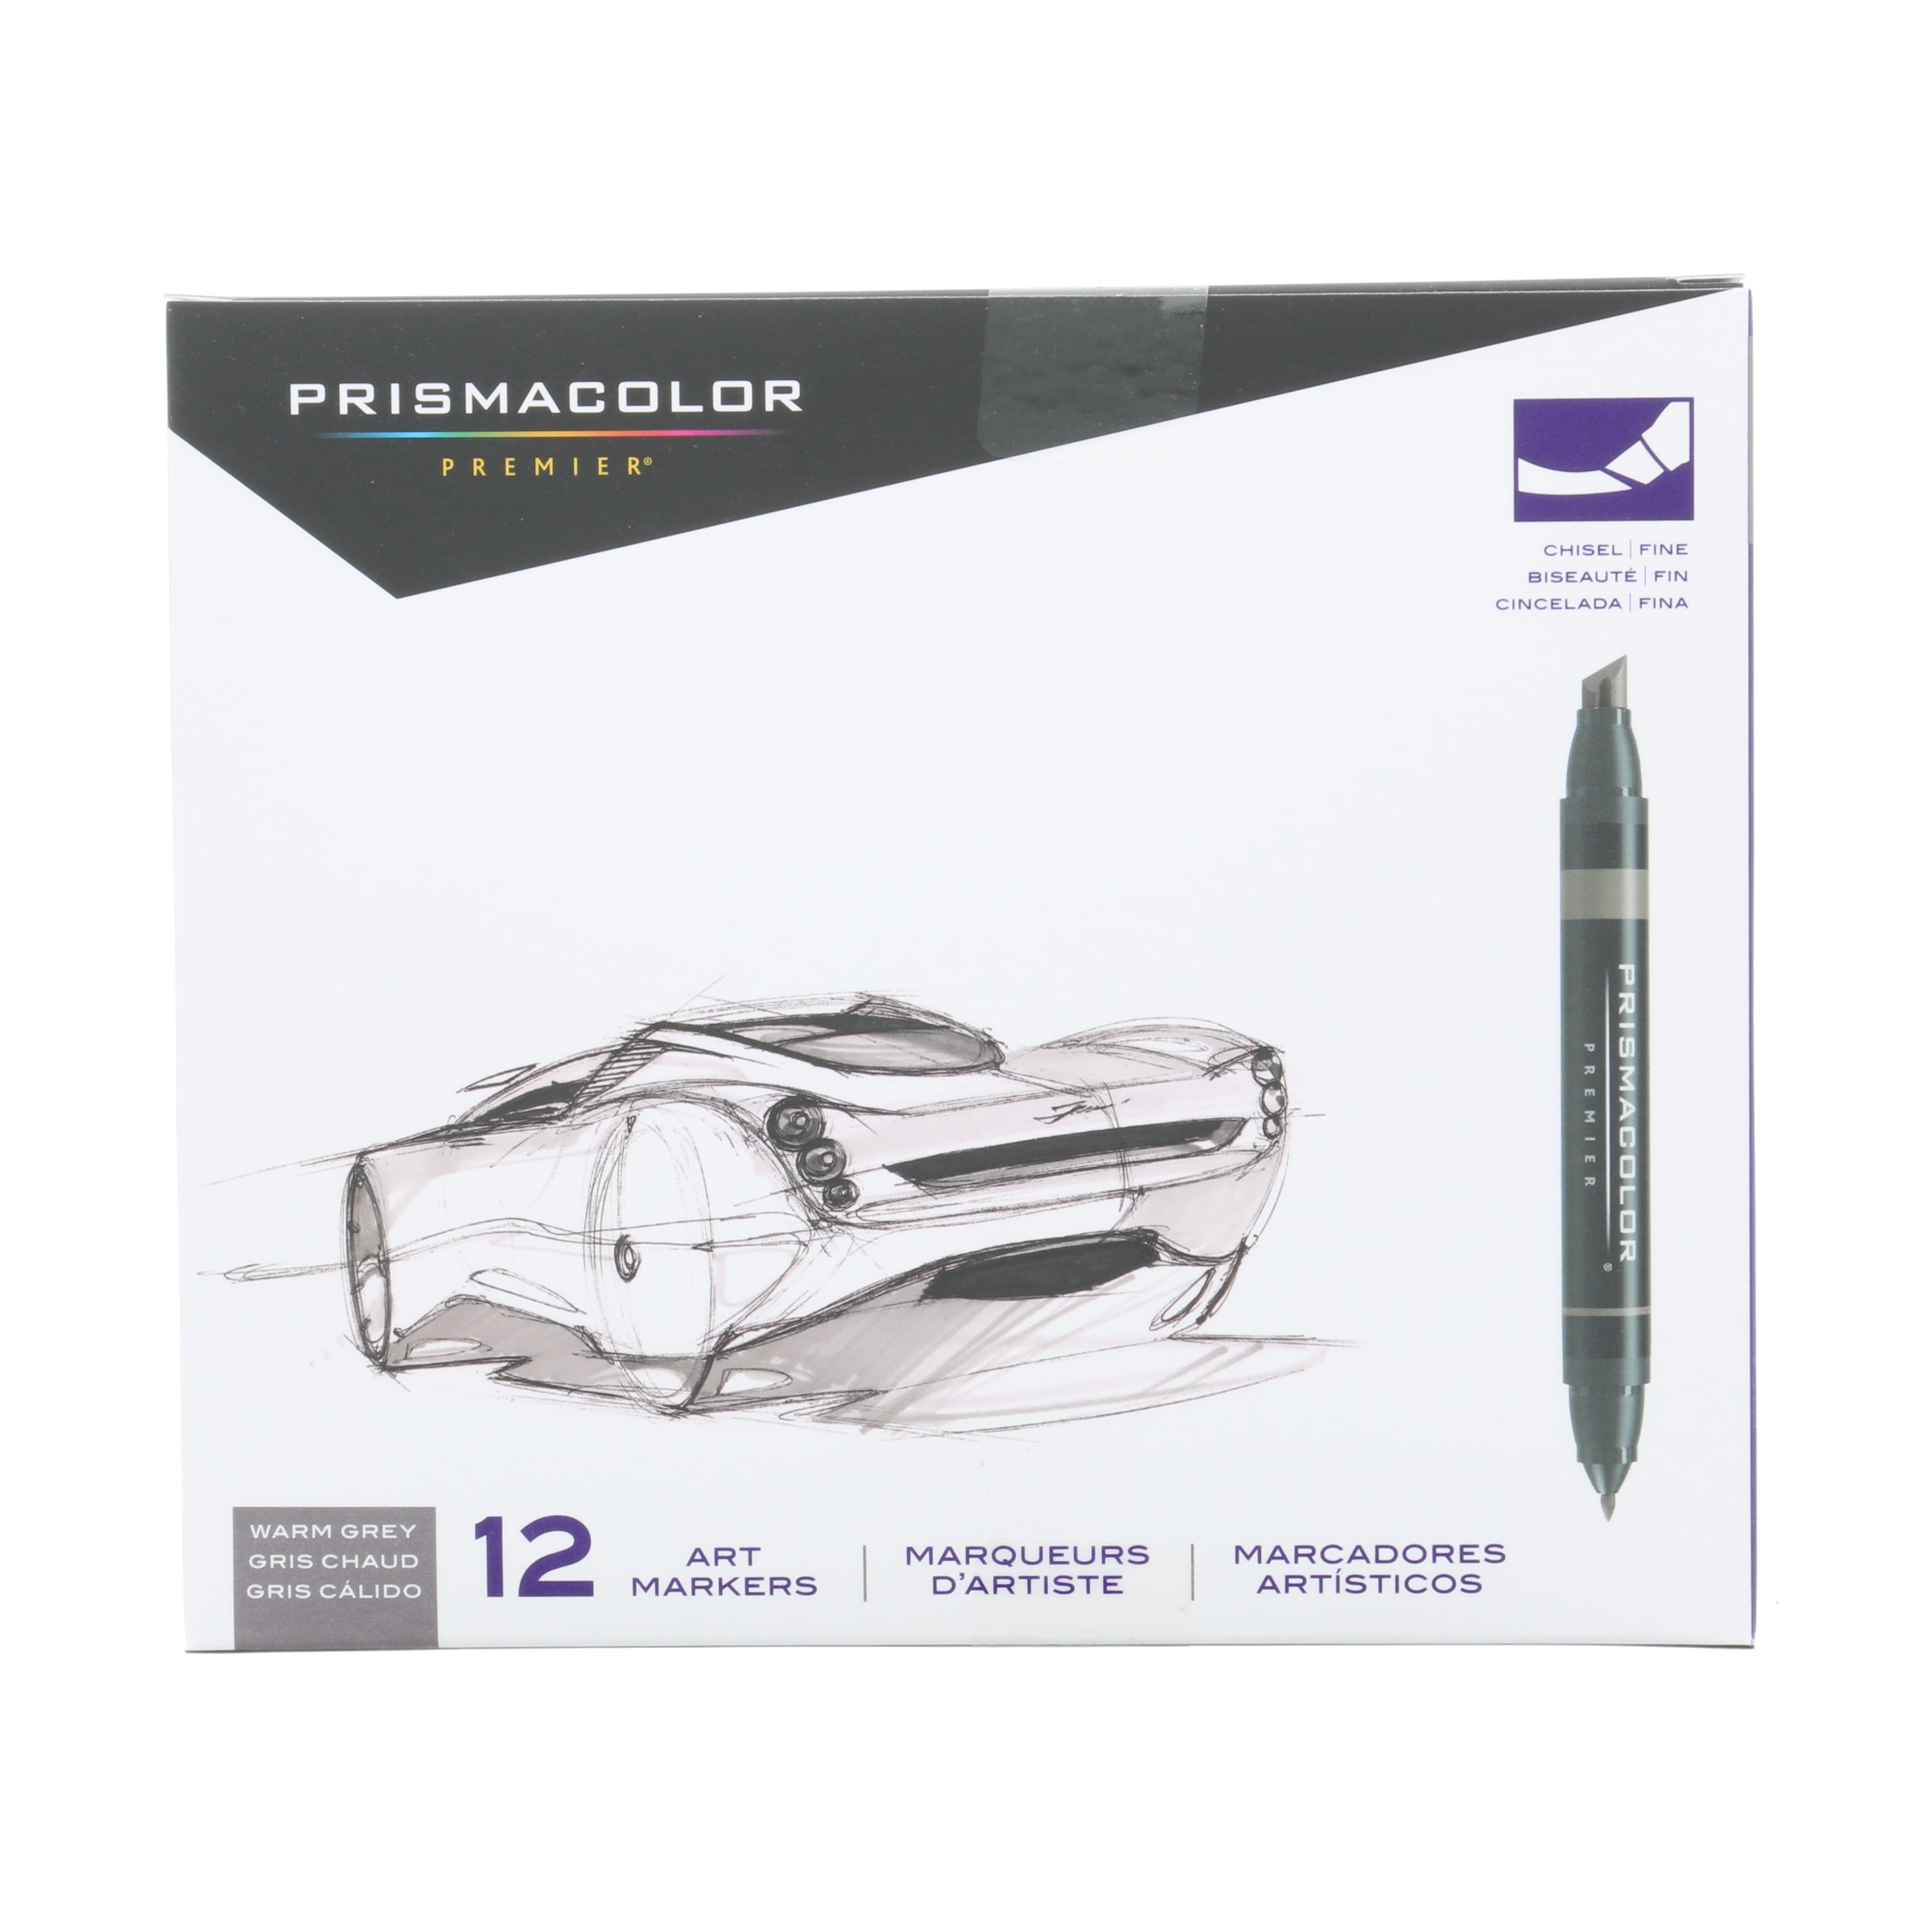  Prismacolor Premier Double-Ended Art Markers, Fine and Brush  Tip, 72 Pack : Everything Else